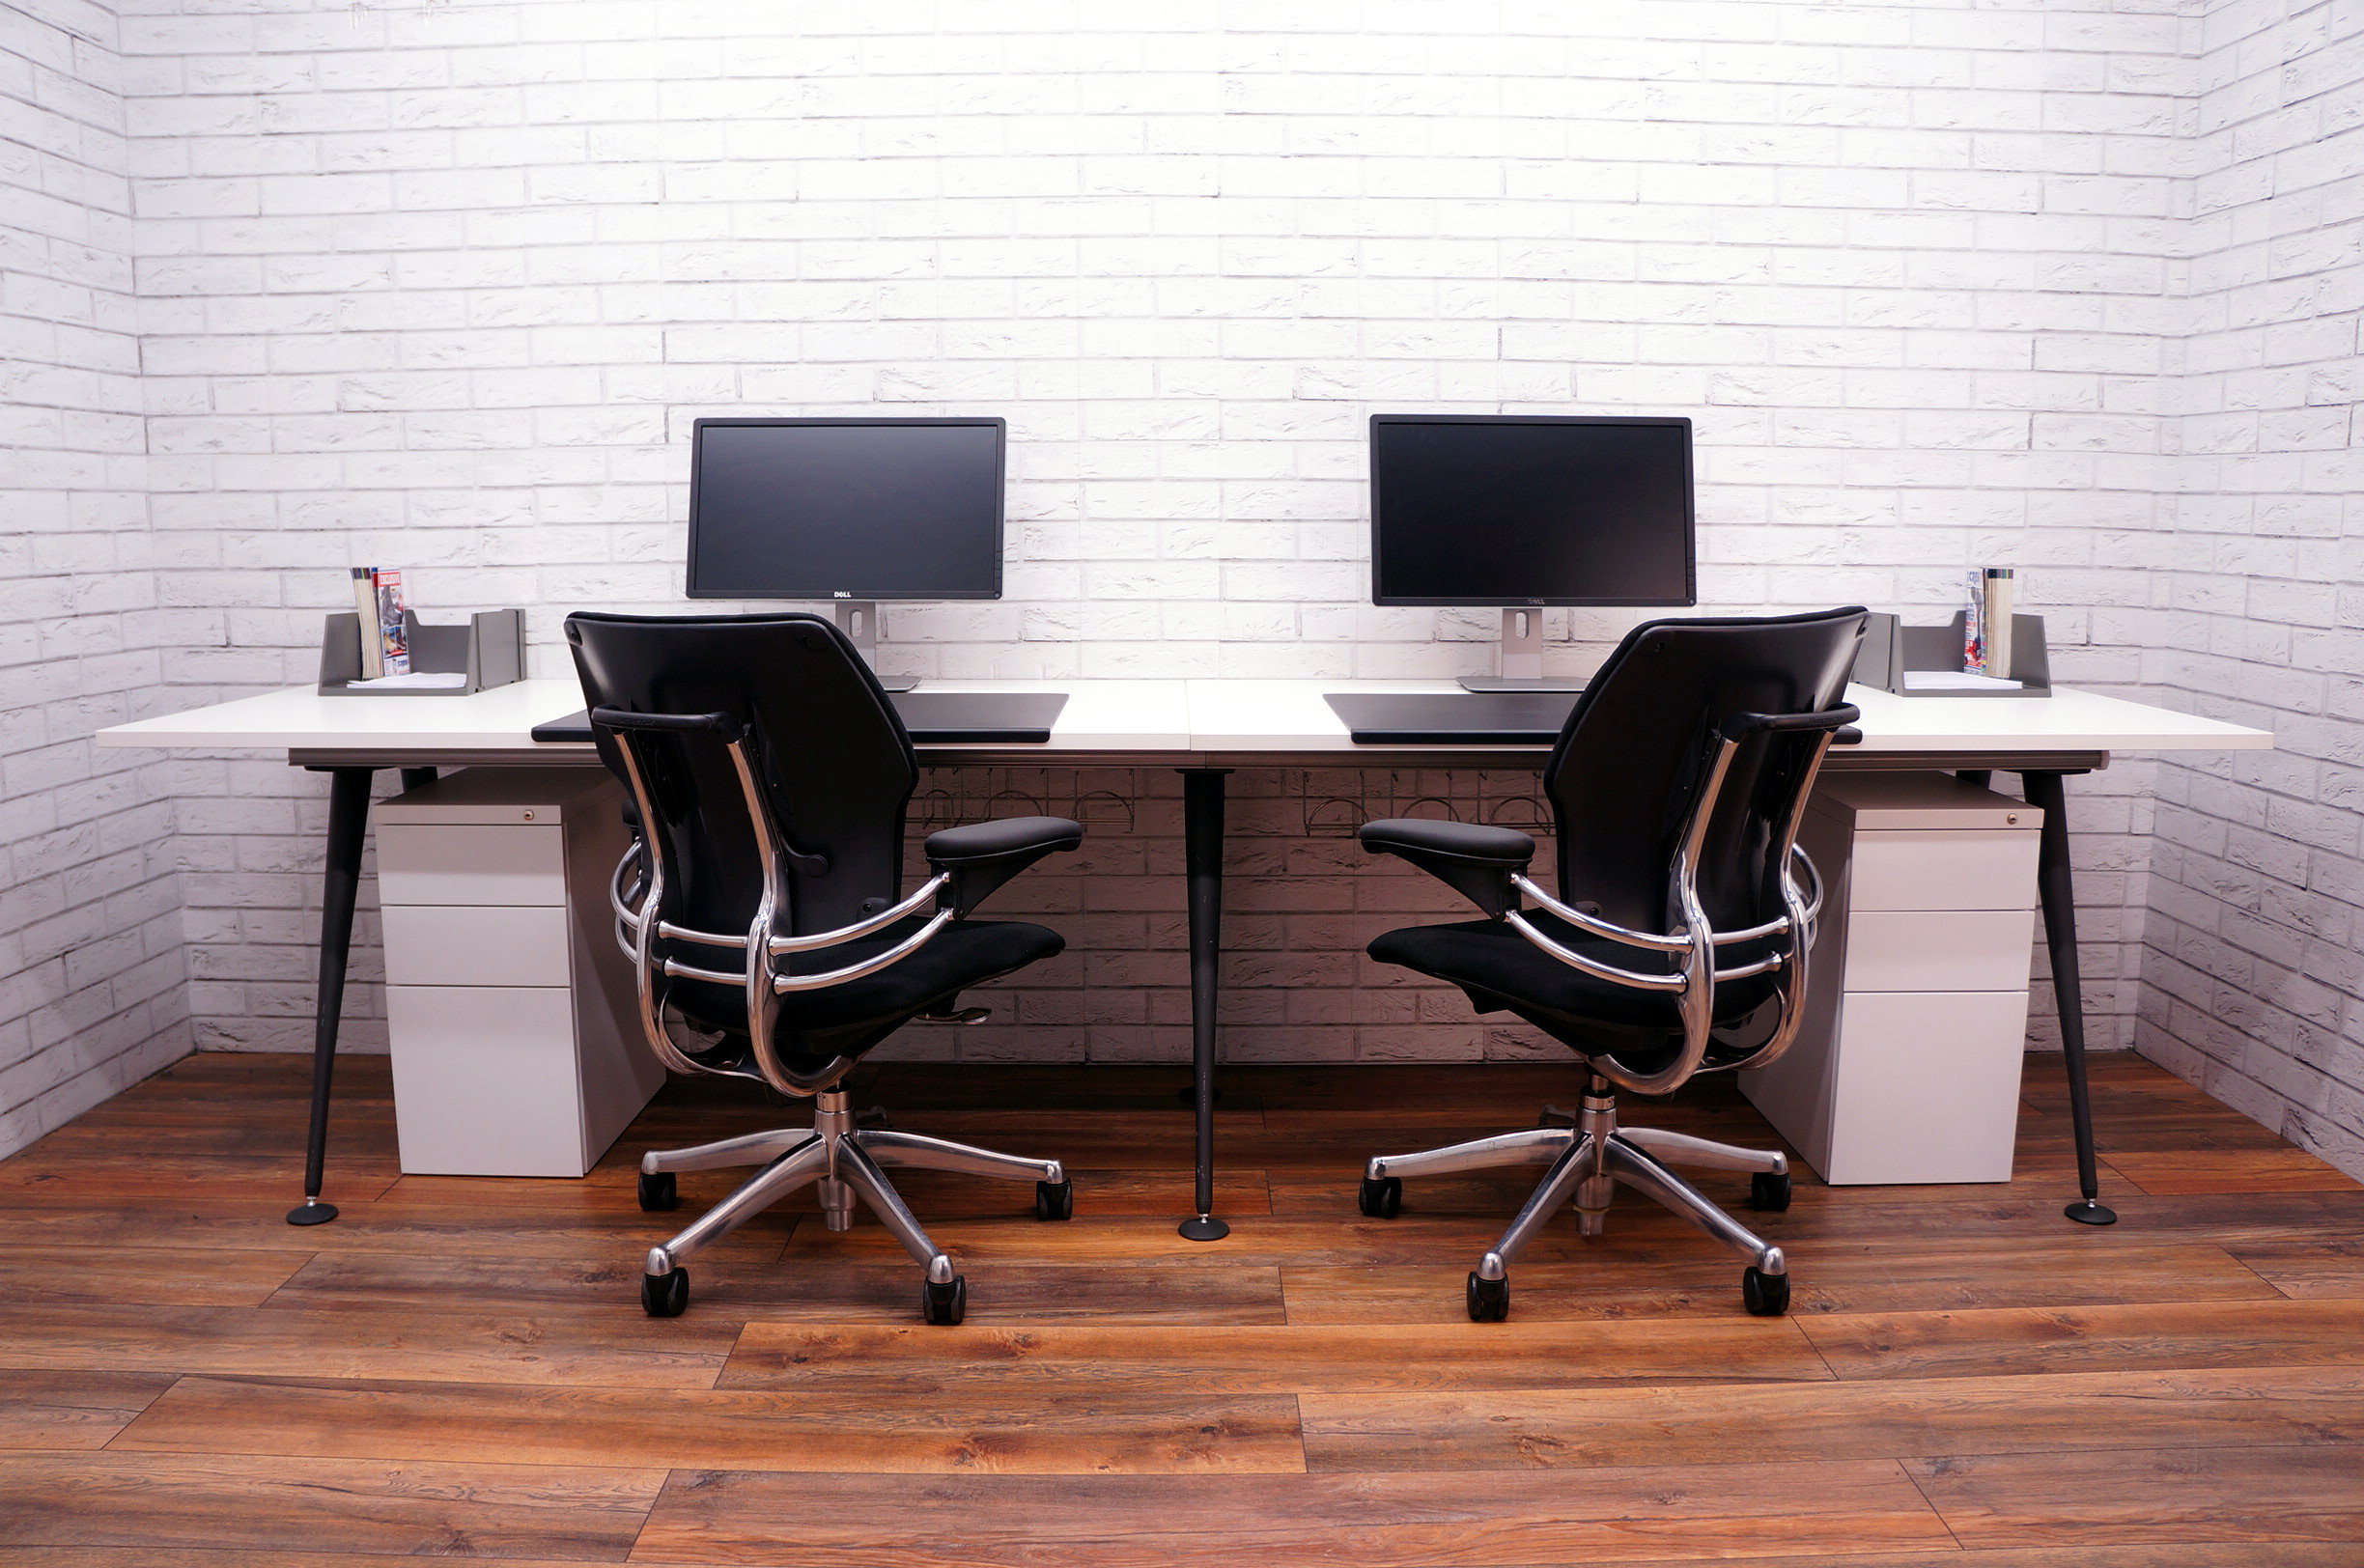 benefit from our used office furniture packages to suit any